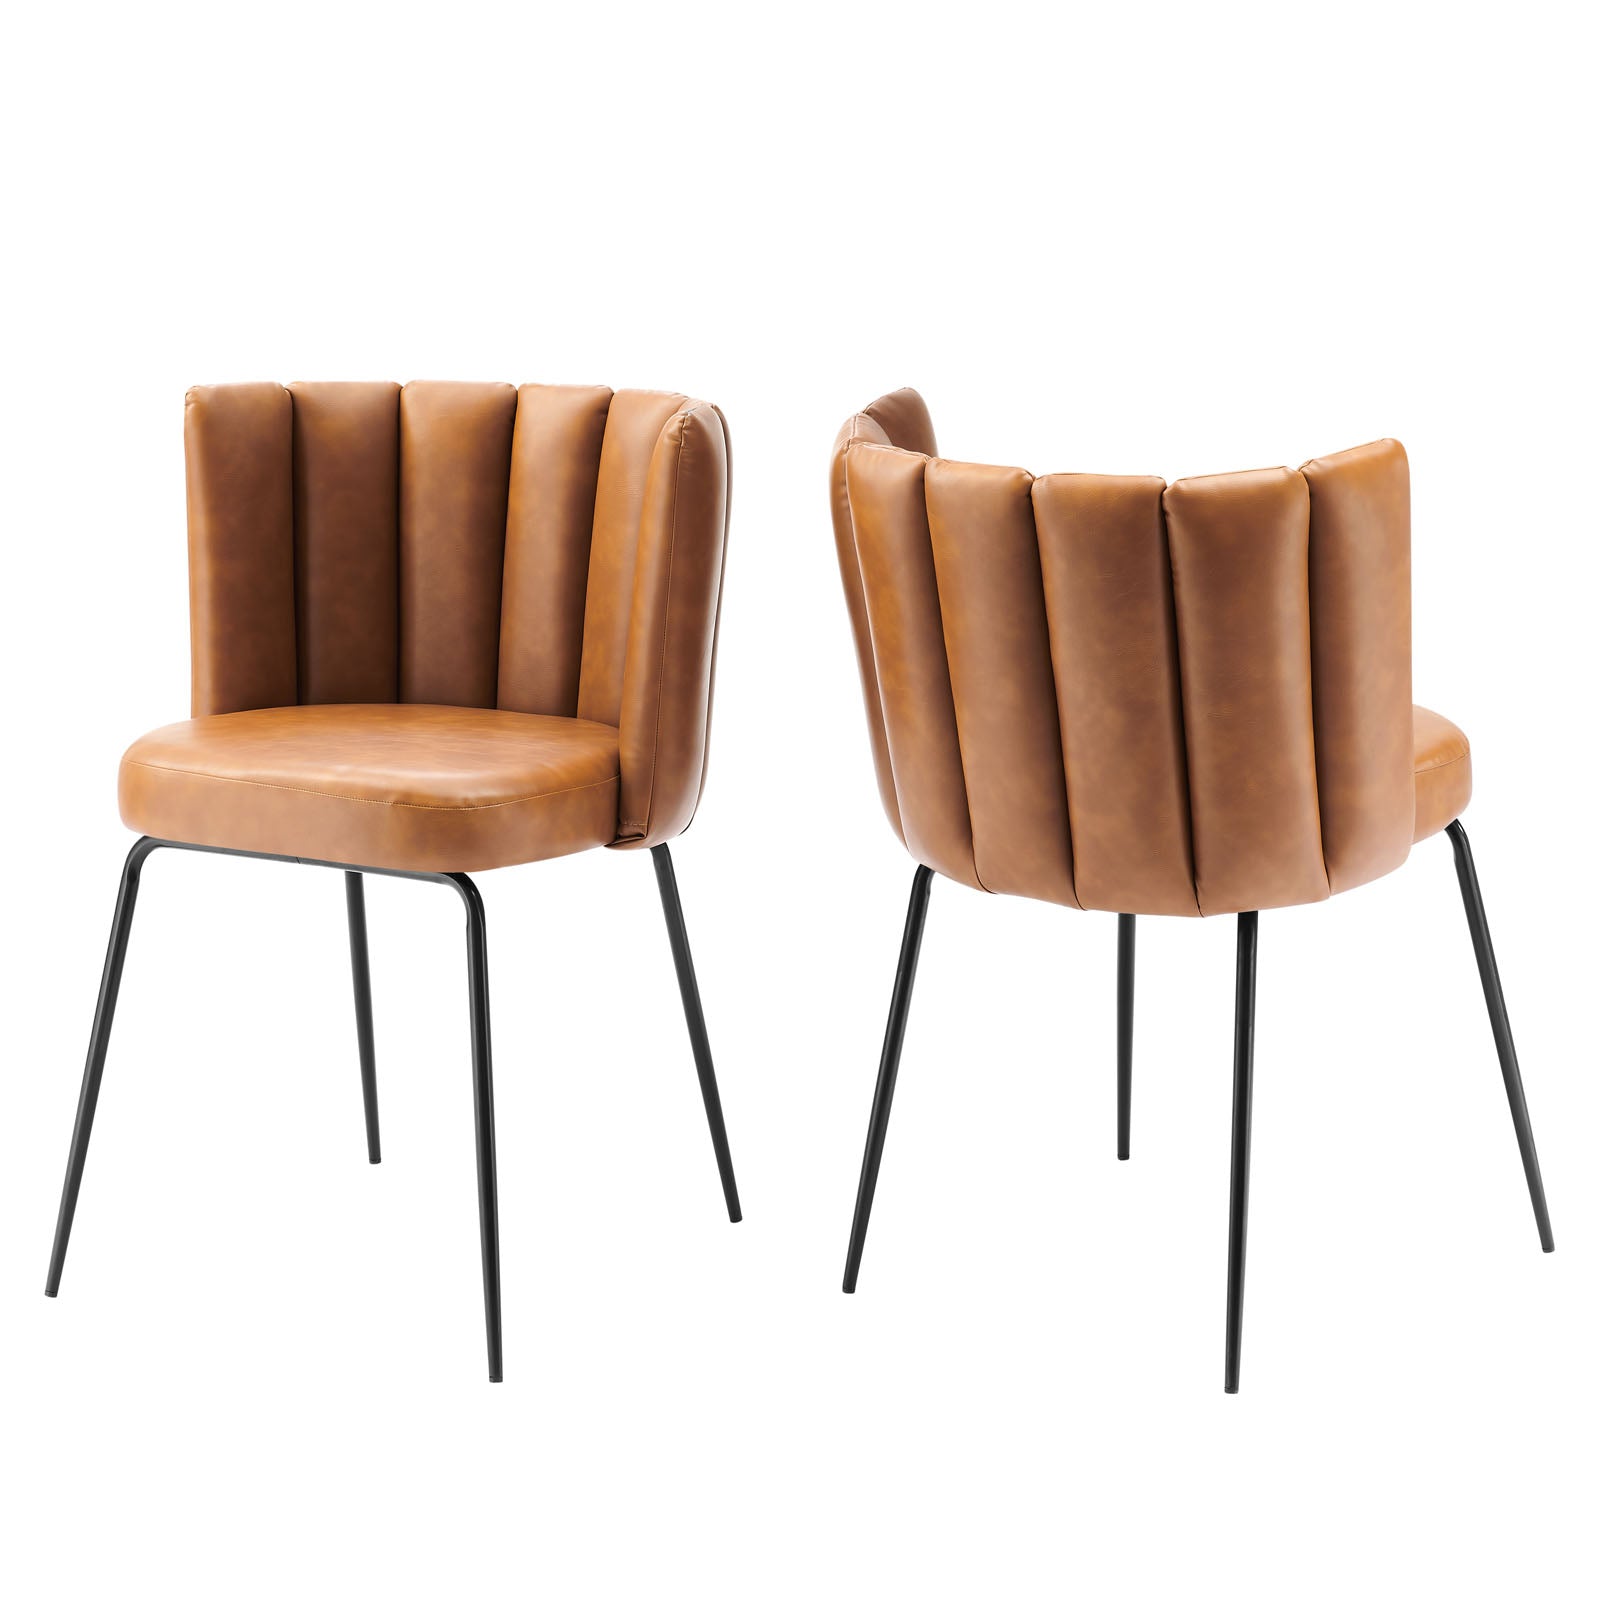 Virtue Vegan Leather Dining Chair Set of 2